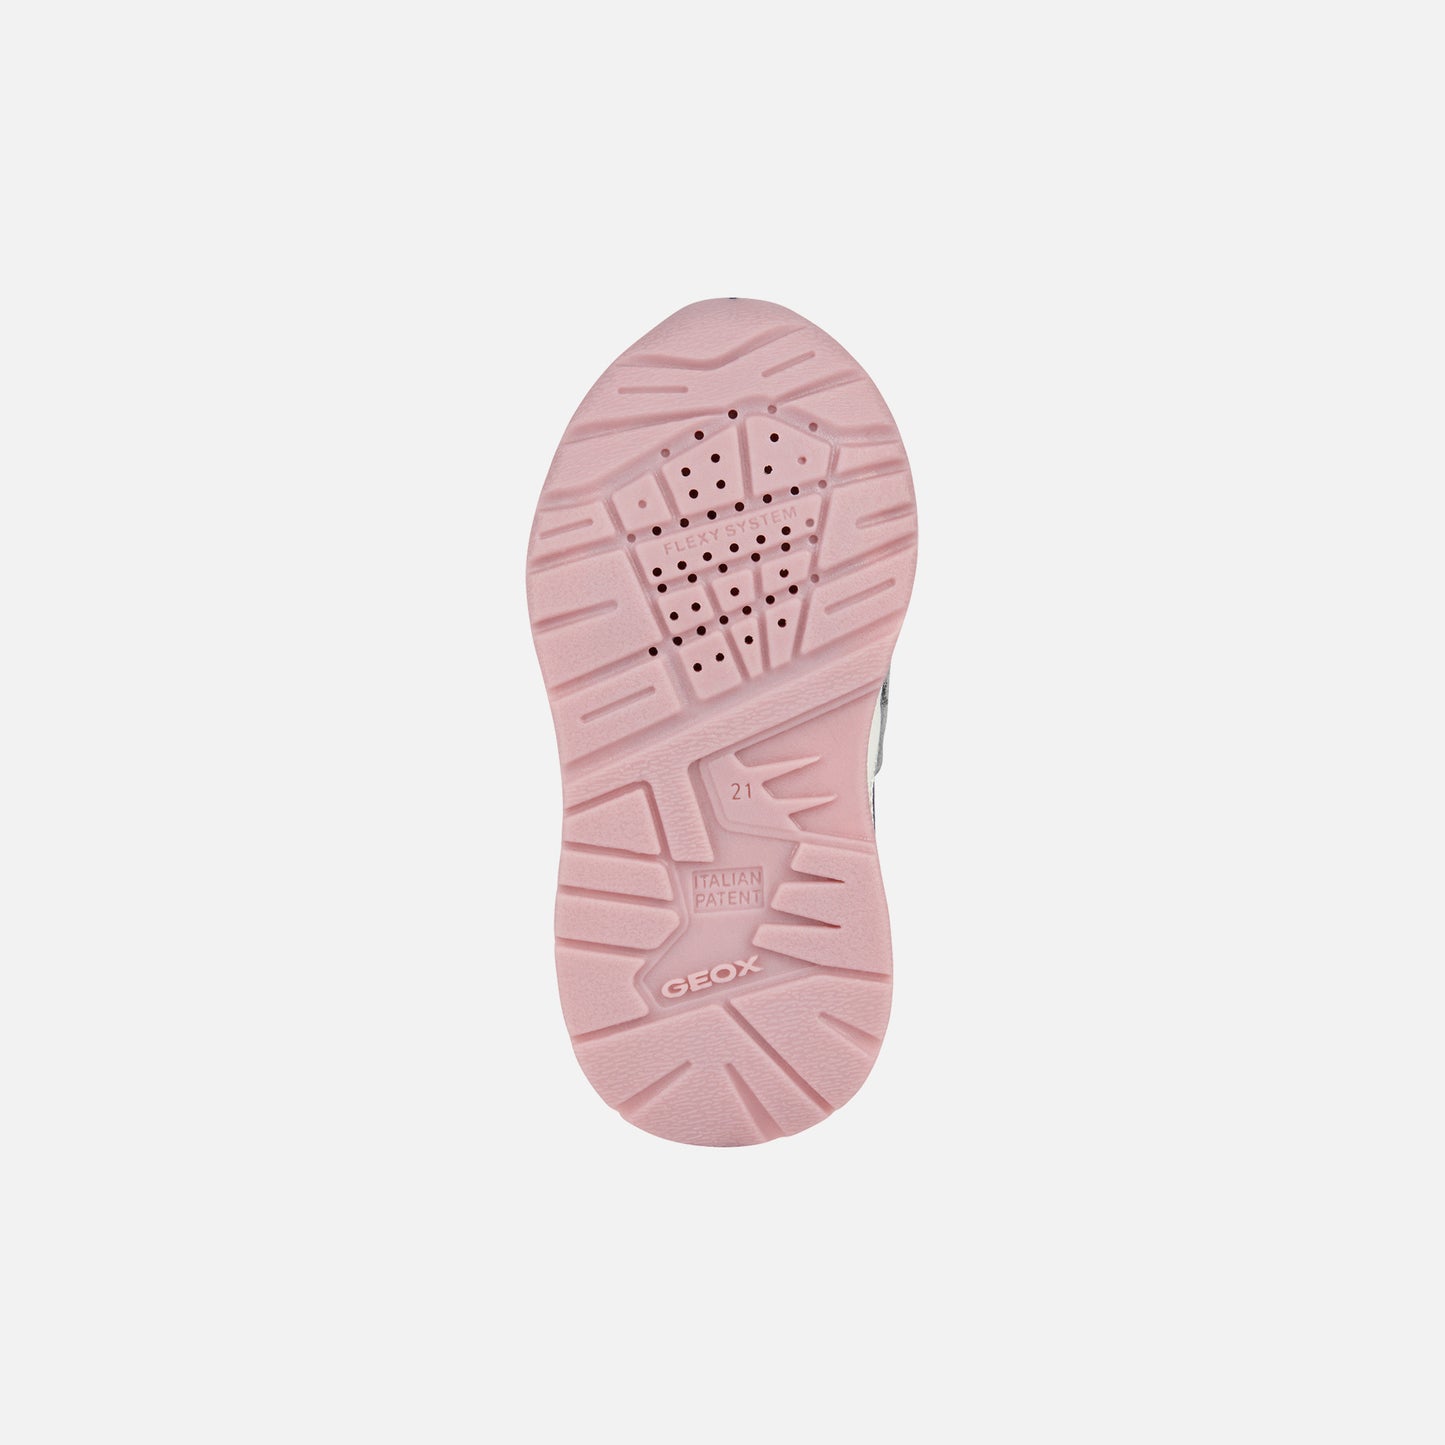 A girls casual sports trainer by Geox, style B Pyrip Girl, in grey and pink . Double velcro fastening. View of sole.